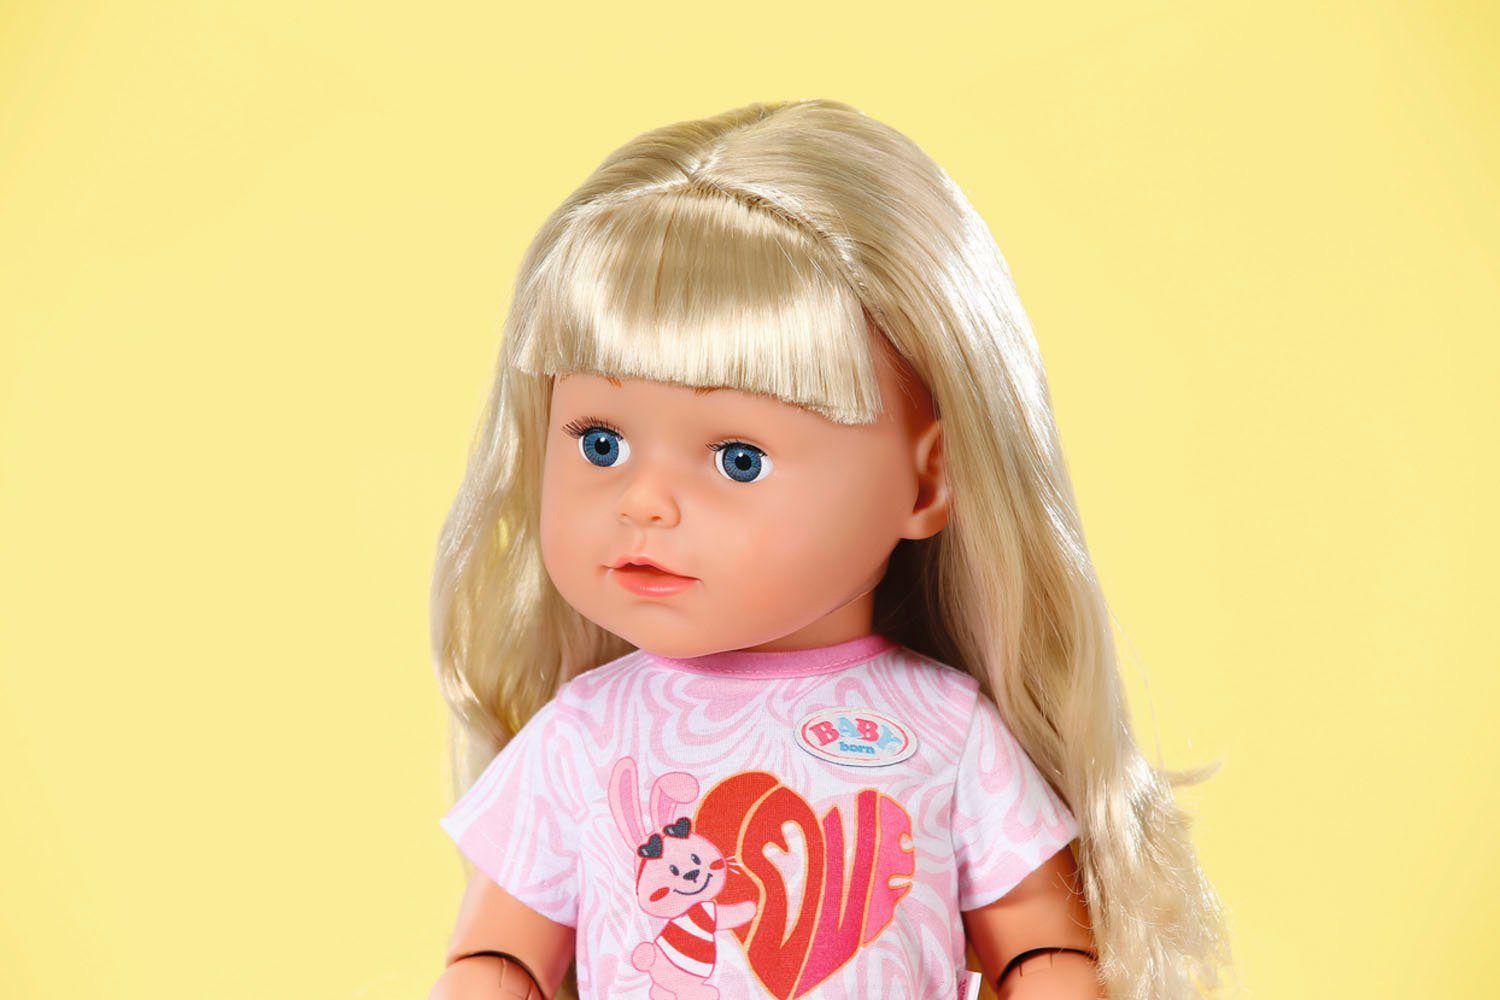 Style&Play, Sister Baby 43 Stehpuppe blond, cm Born